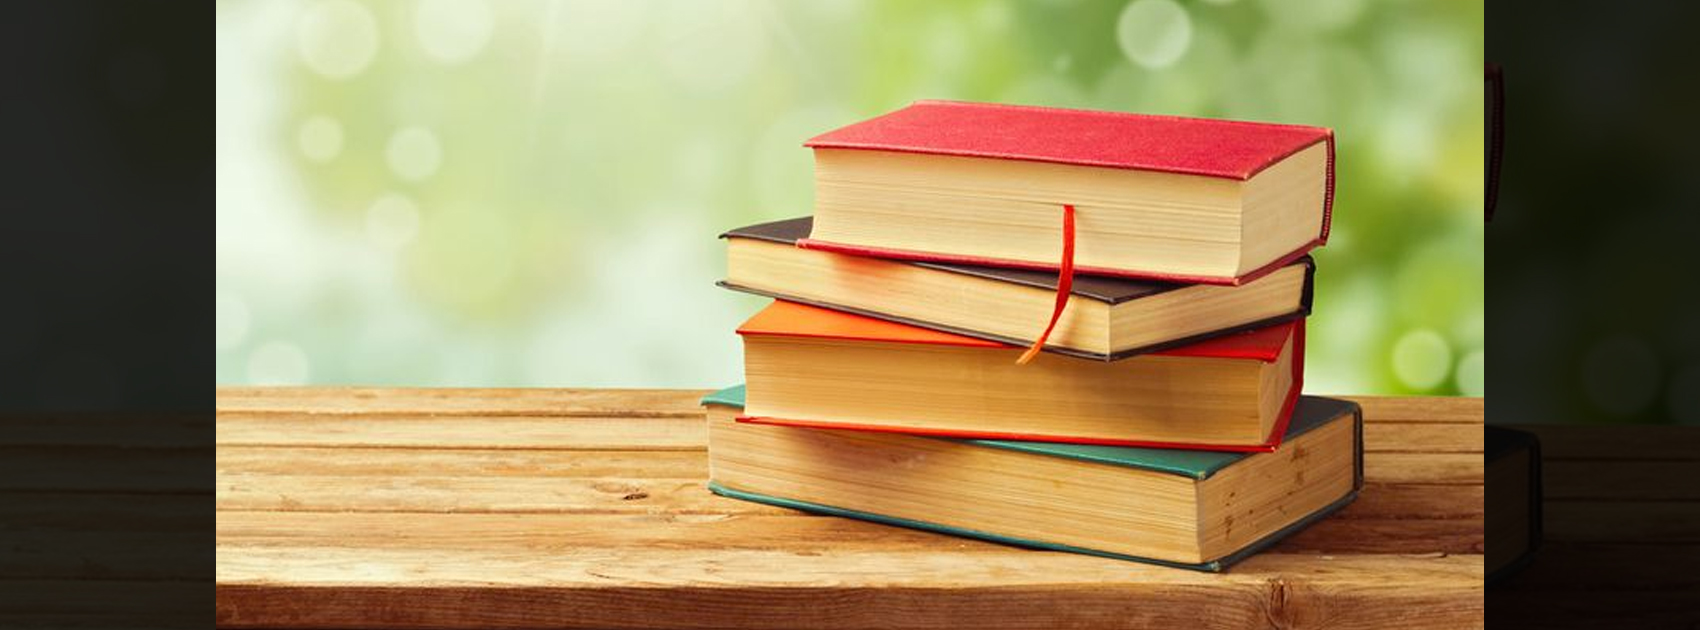 Four Books About Finance, 4 Books Every Young Entrepreneur,Startup Stories,2019 Latest Business News,2019 Entrepreneur Books,Best Entrepreneur Books of 2019,Entrepreneur Business Books,Latest Entrepreneur Books,Must Read Books Entrepreneur About Finance, startup stories, Top 5 Finance Books